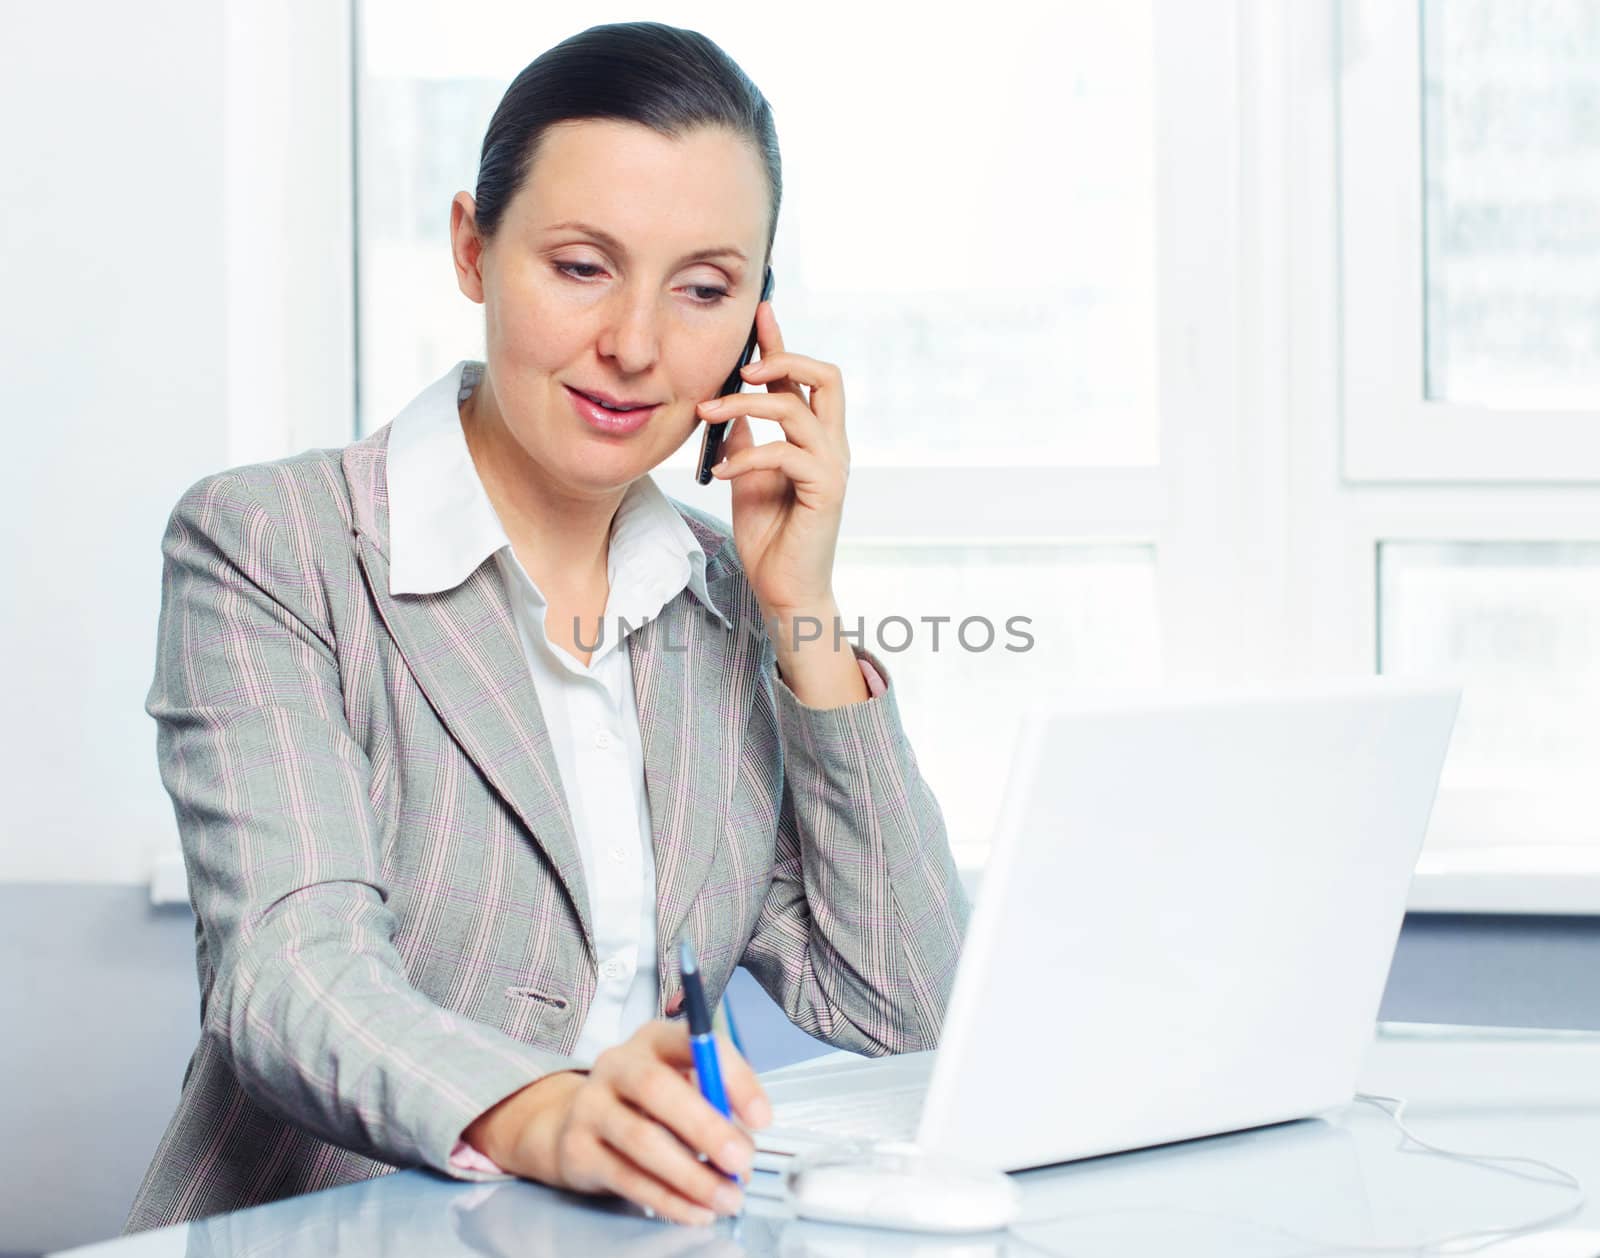 Attractive smiling young business woman using laptop at work desk